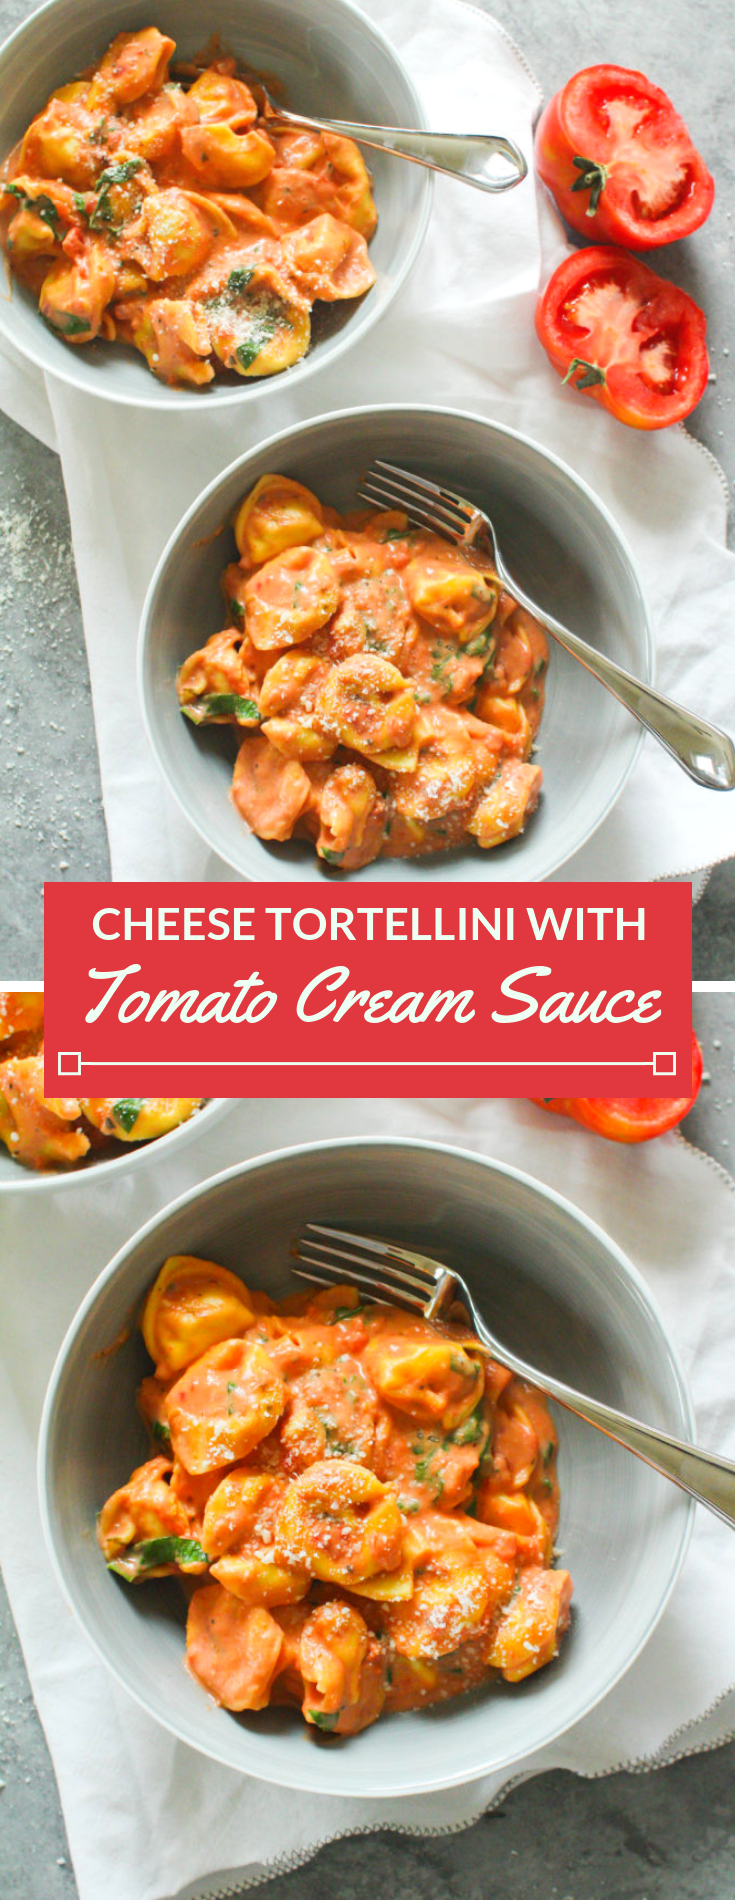 Cheese tortellini tossed in a creamy tomato sauce with plenty of salty Parmesan cheese and wilted baby spinach. 